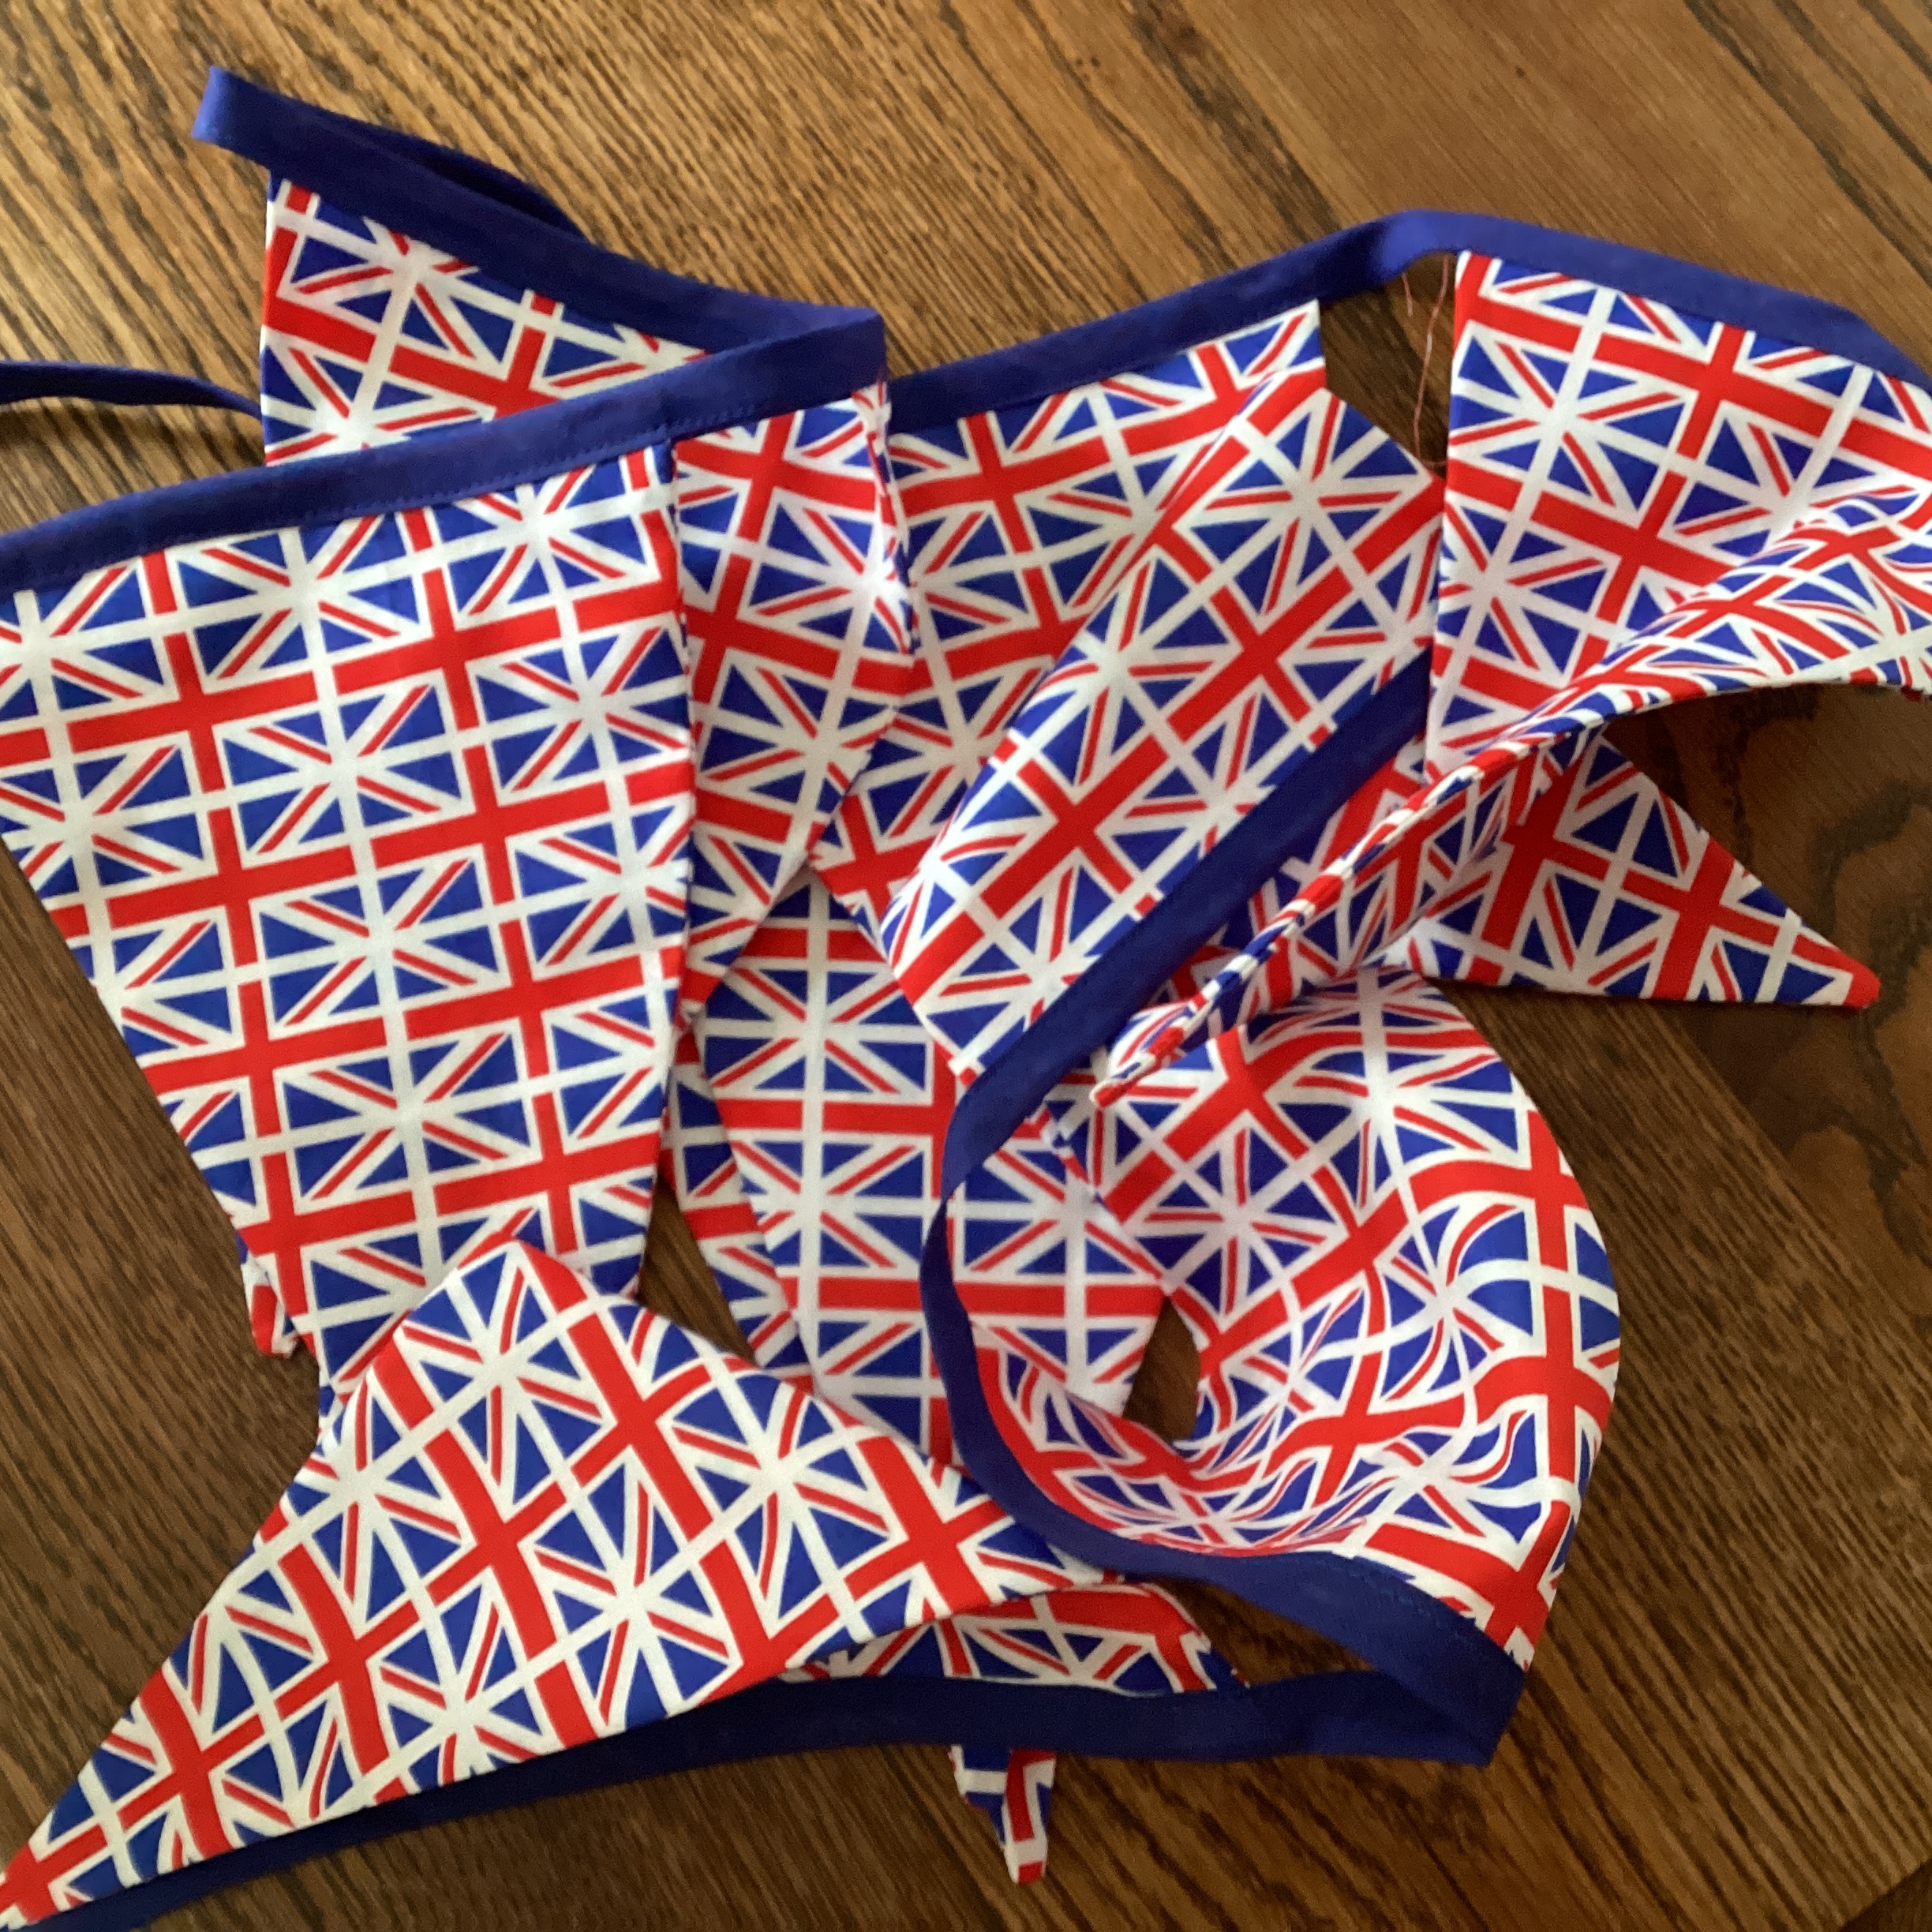 Bunting - Union Jack flags